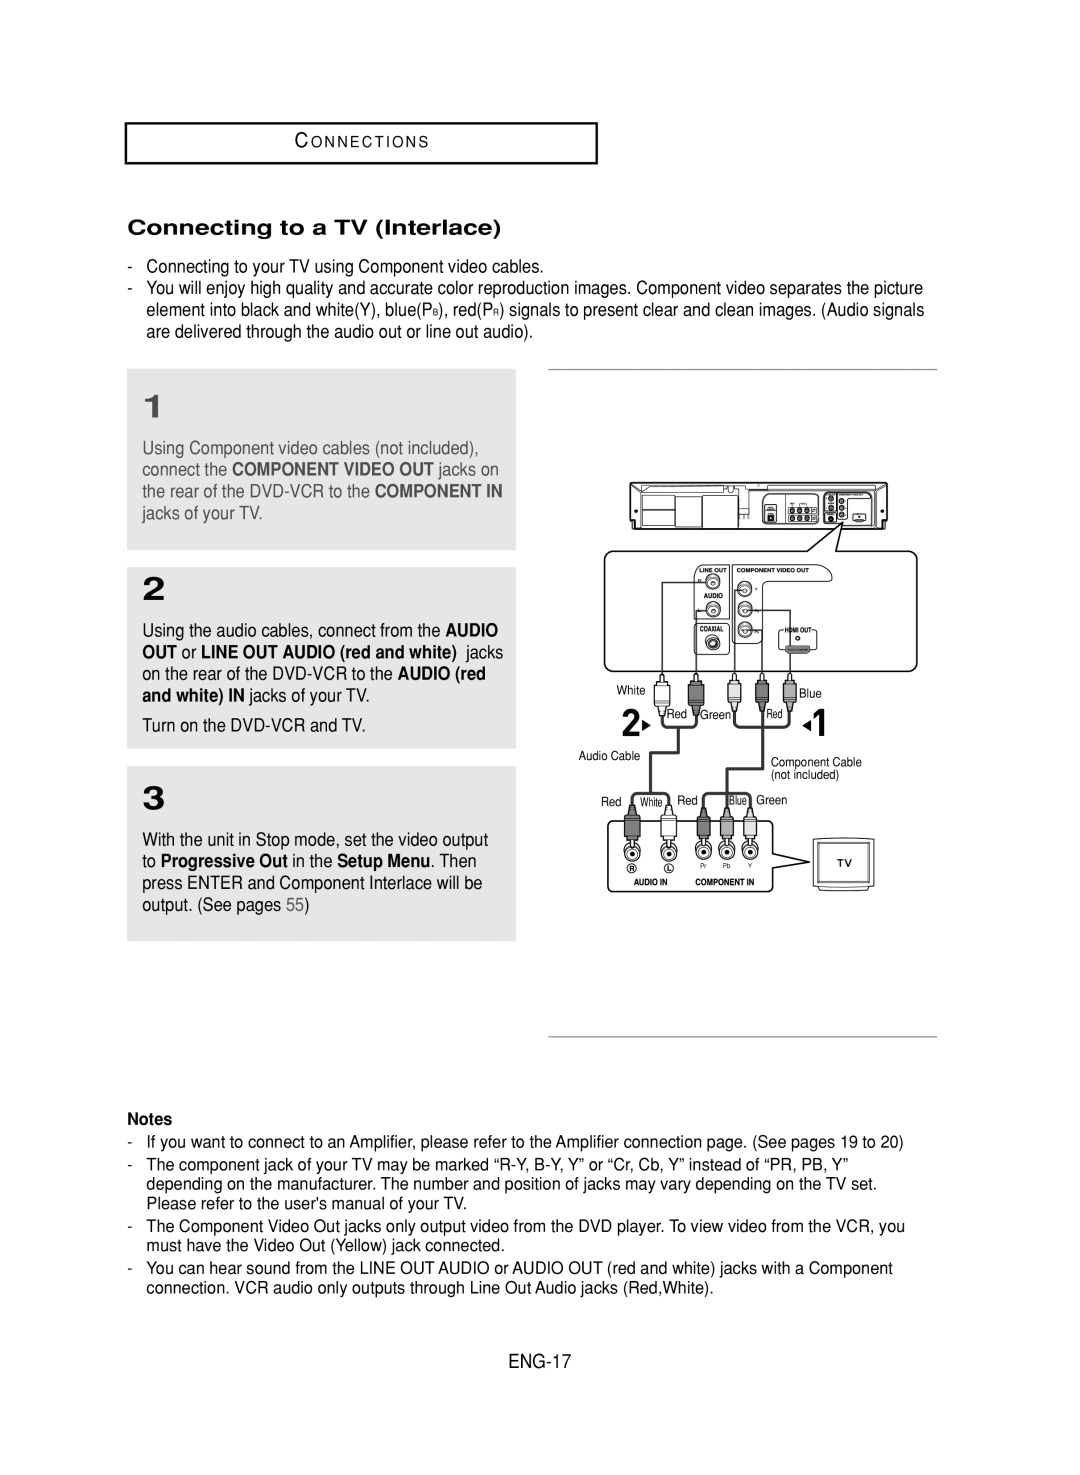 Samsung DVD-V9800 instruction manual Connecting to a TV Interlace, ENG-17 